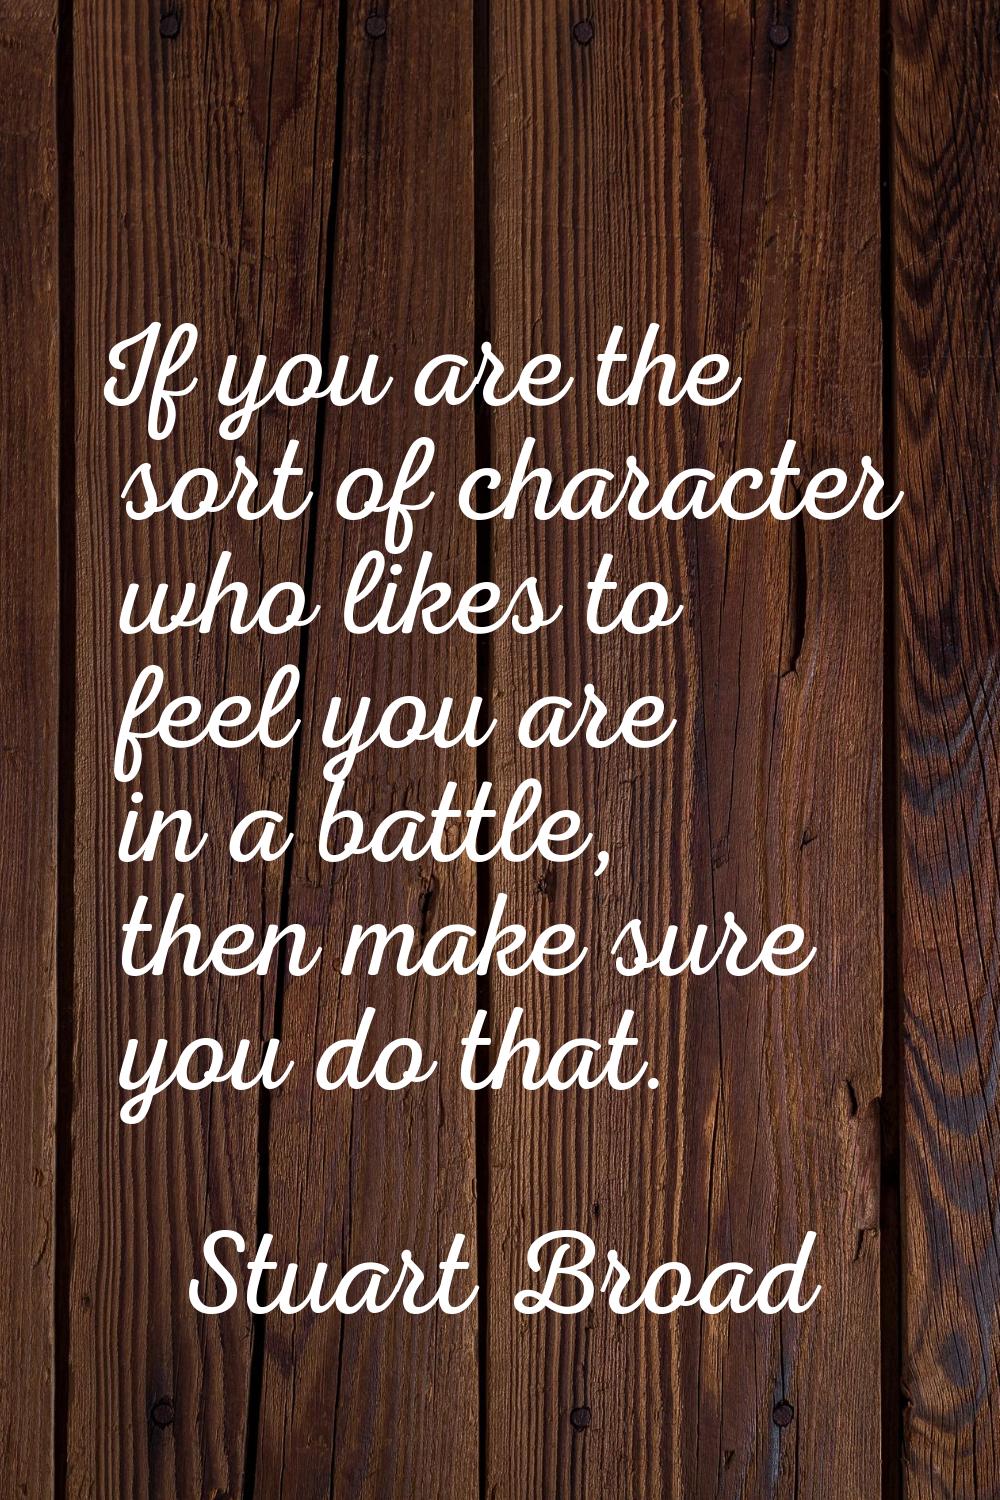 If you are the sort of character who likes to feel you are in a battle, then make sure you do that.